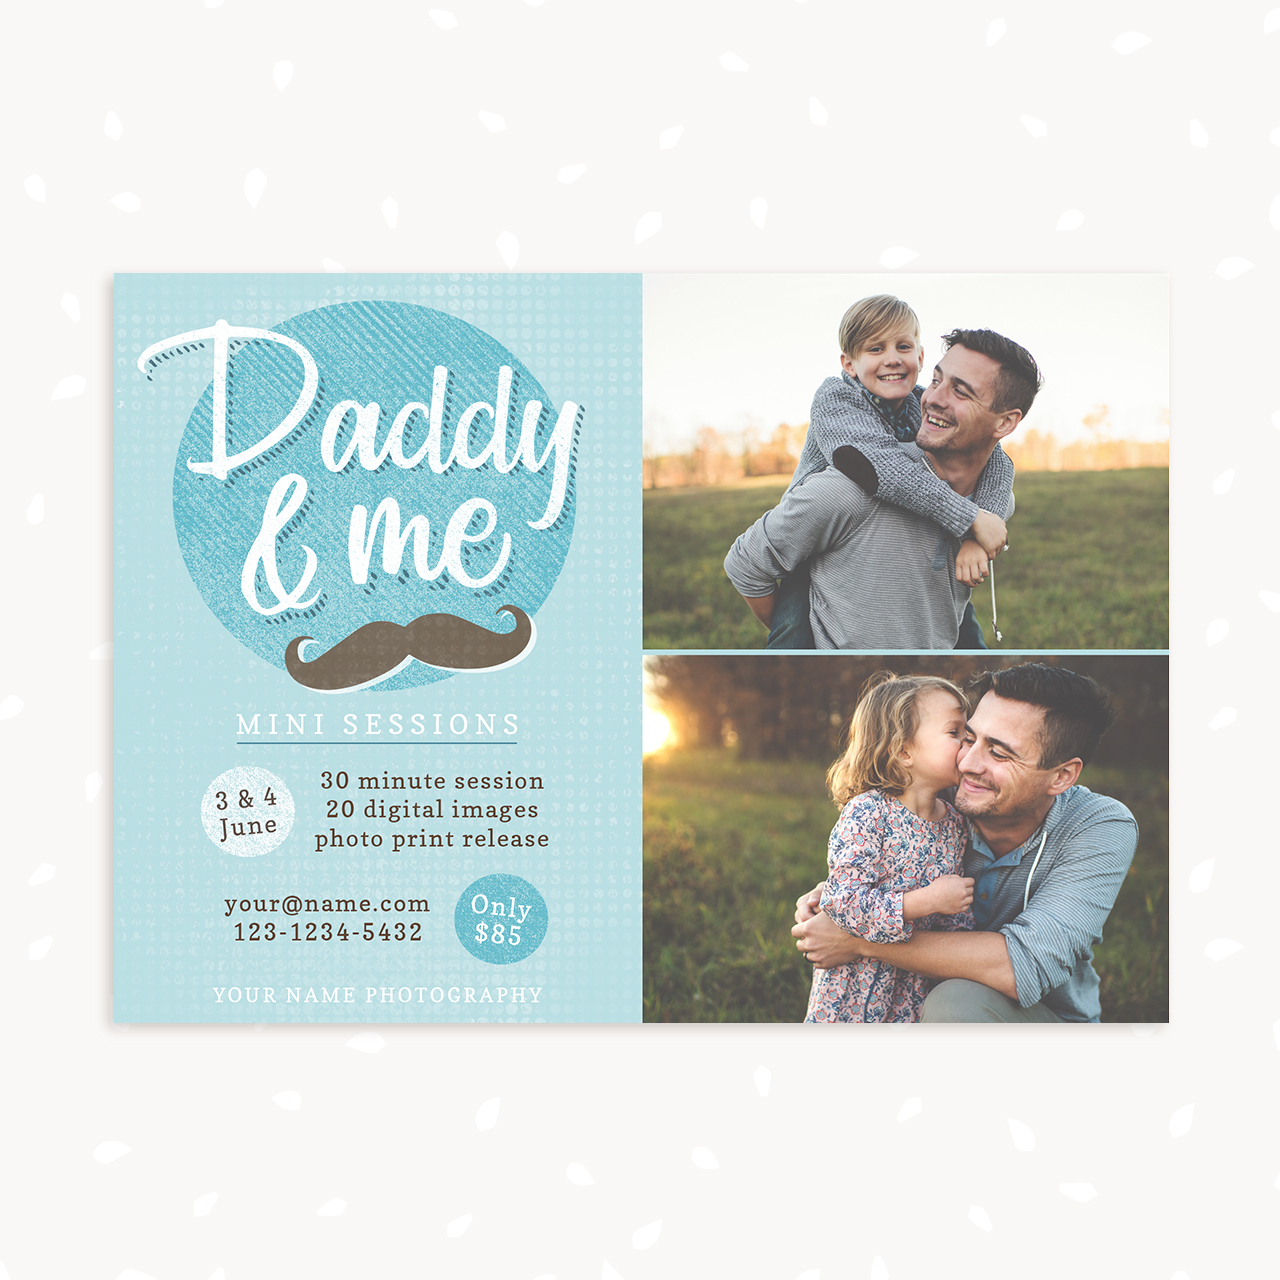 Daddy and me mini sessions template